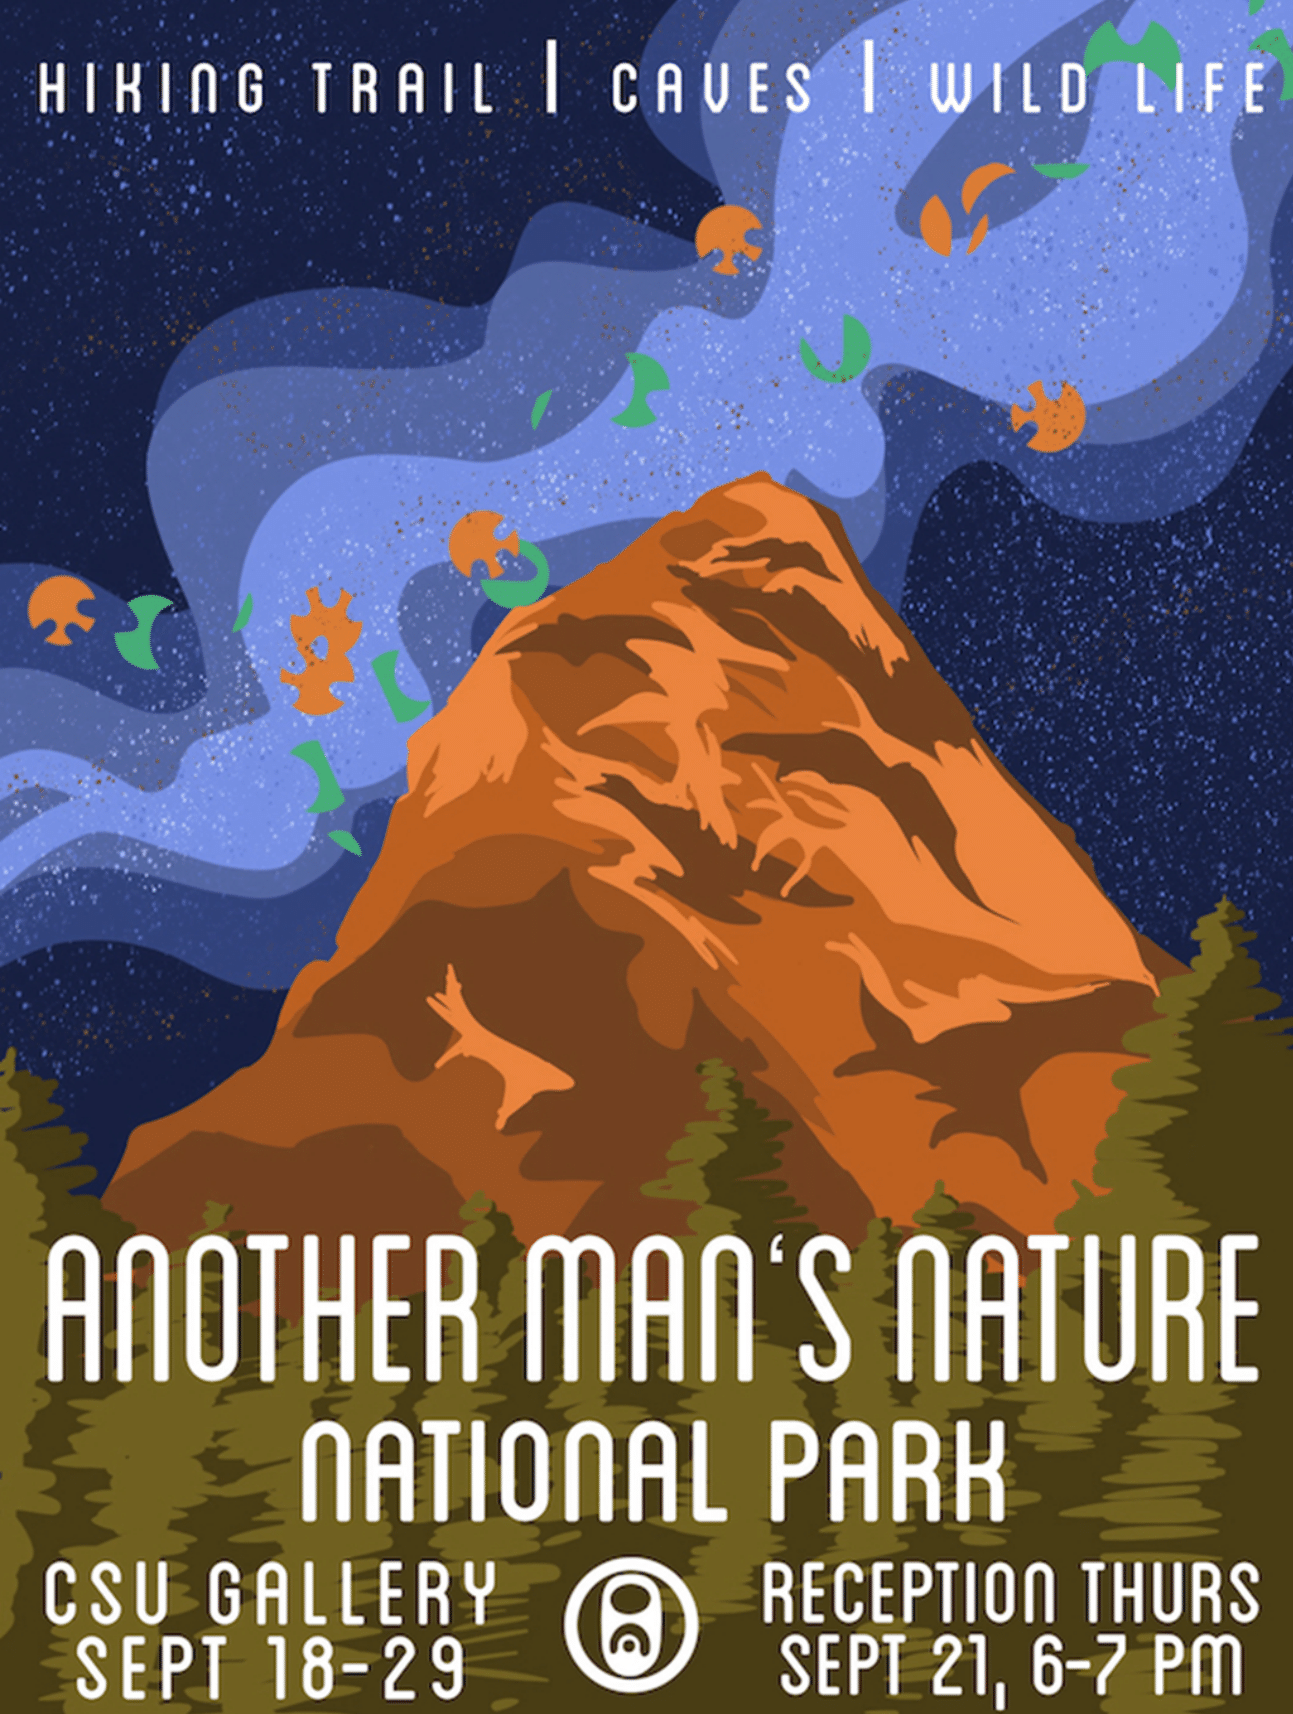 Flyer for Another Man's Nature National Park Gallery